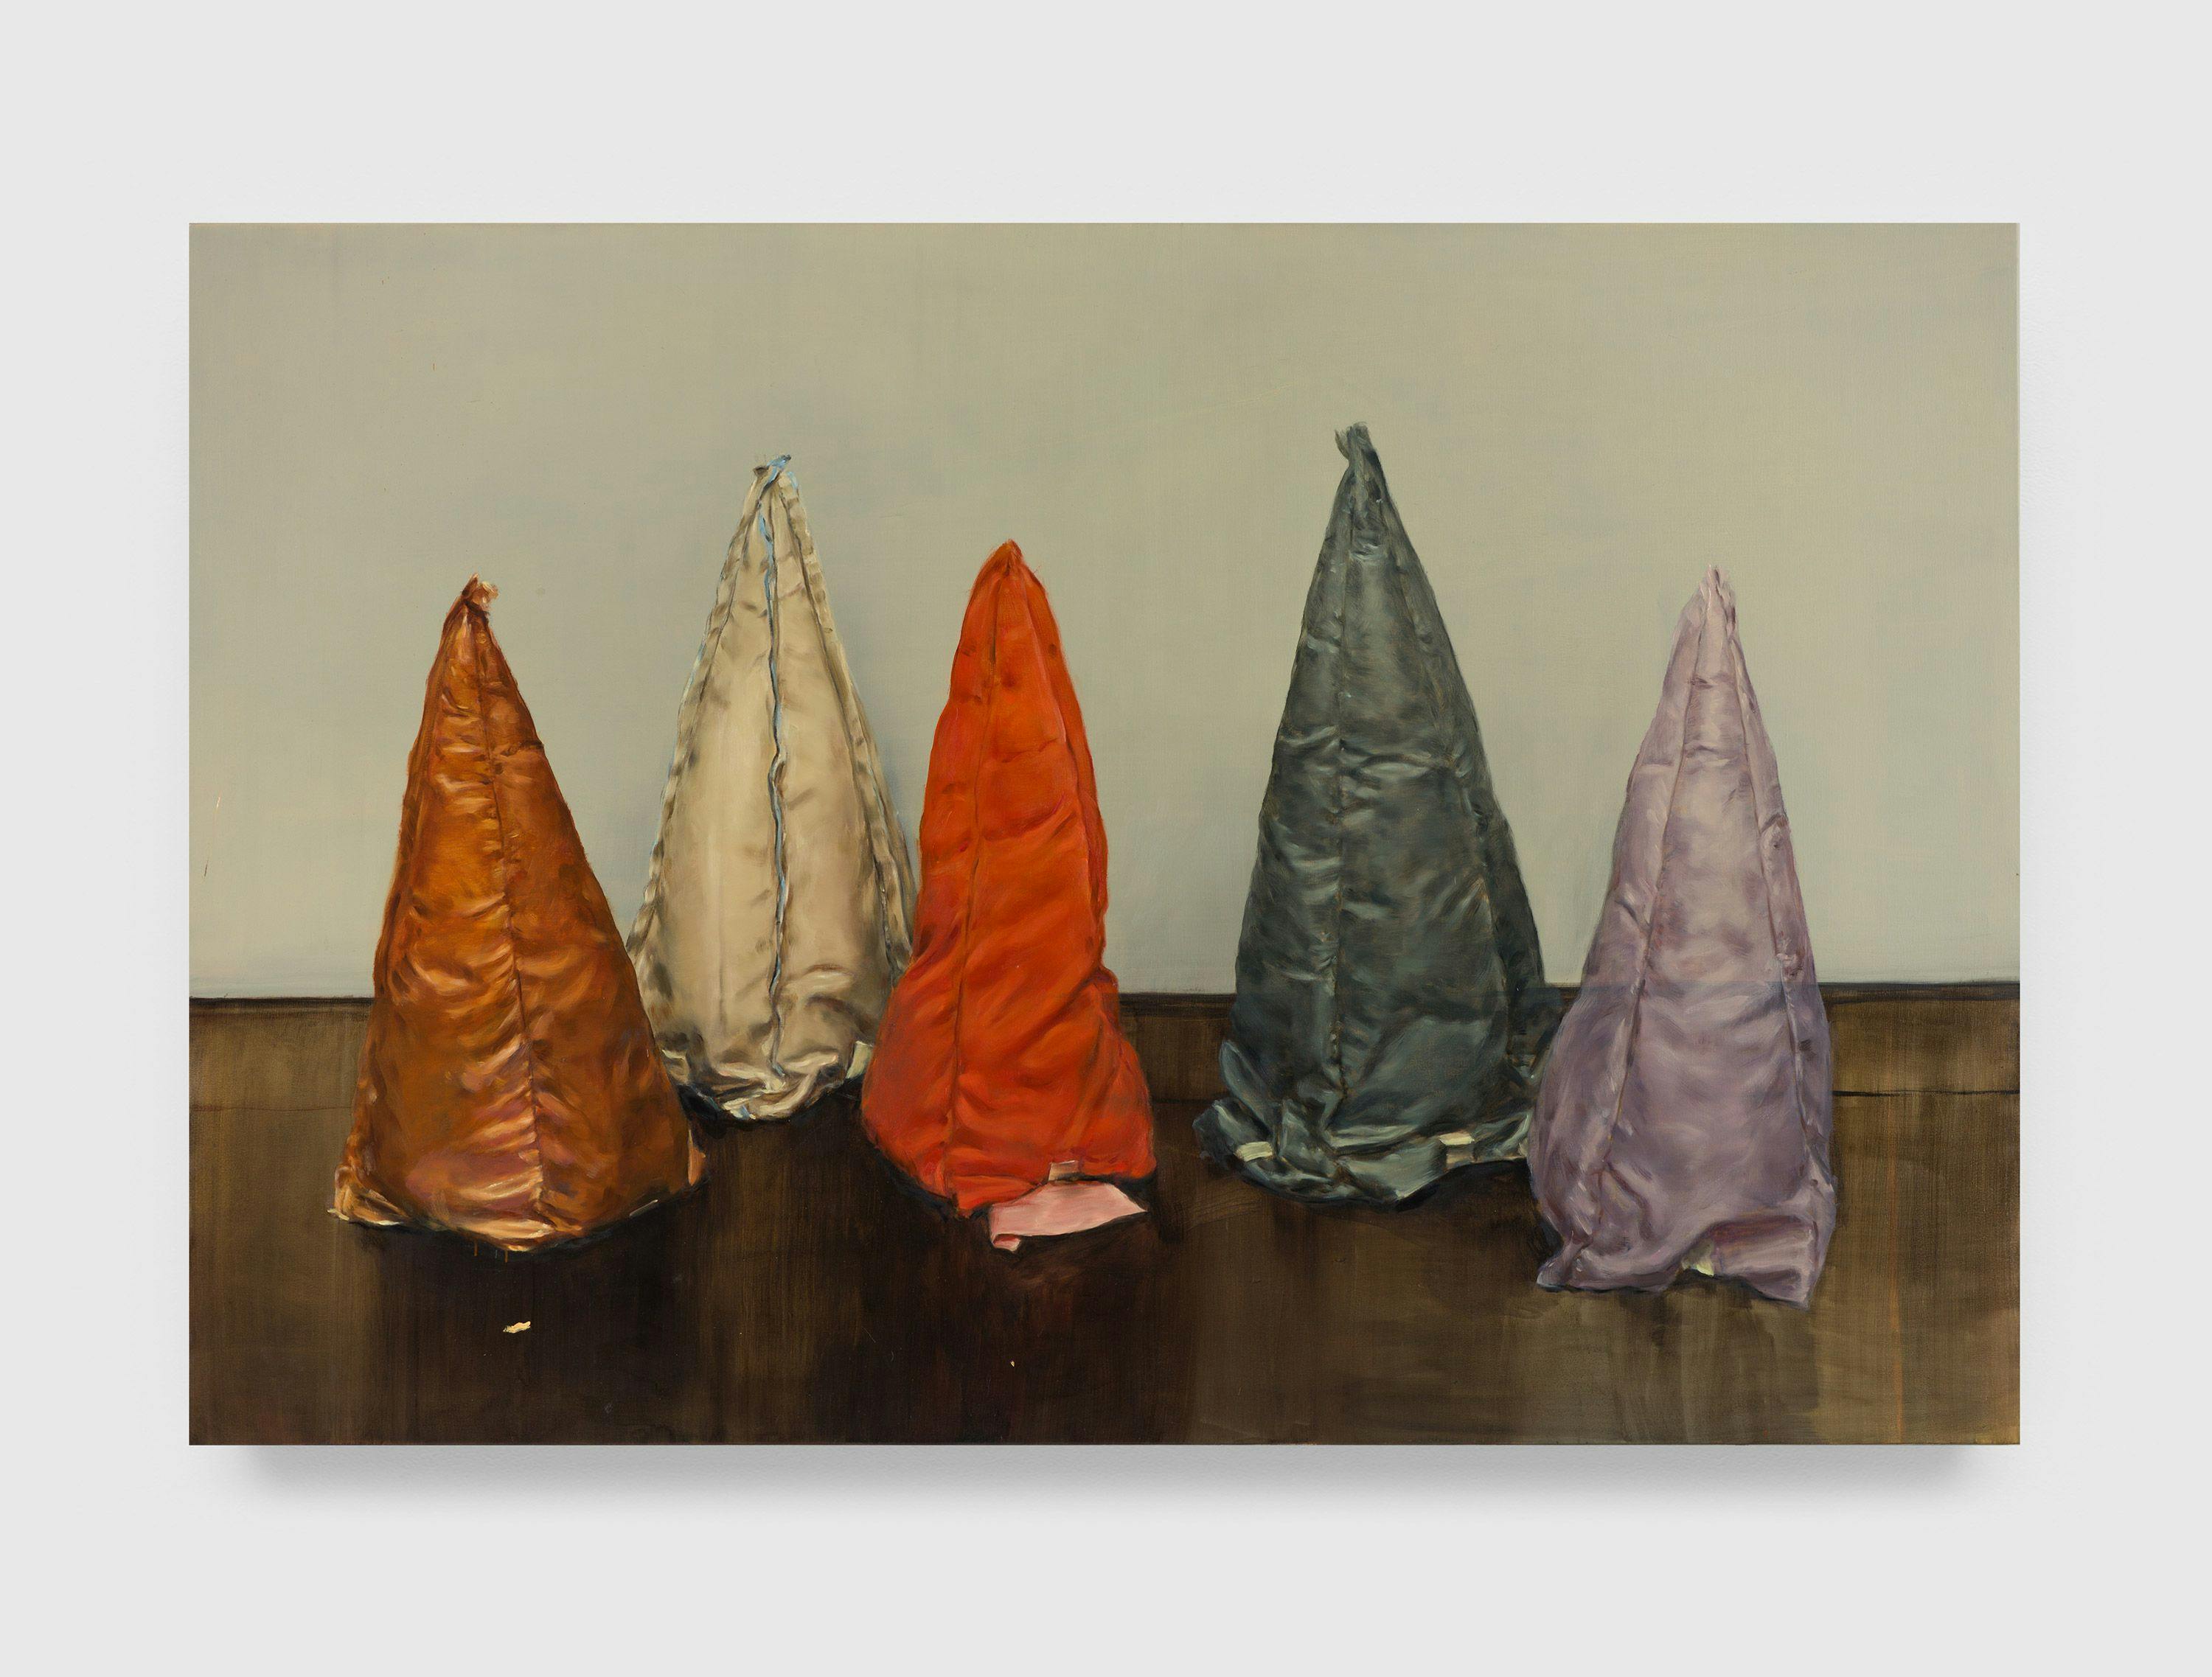 A painting by Michaël Borremans, titled Coloured Cones II, dated 2020.